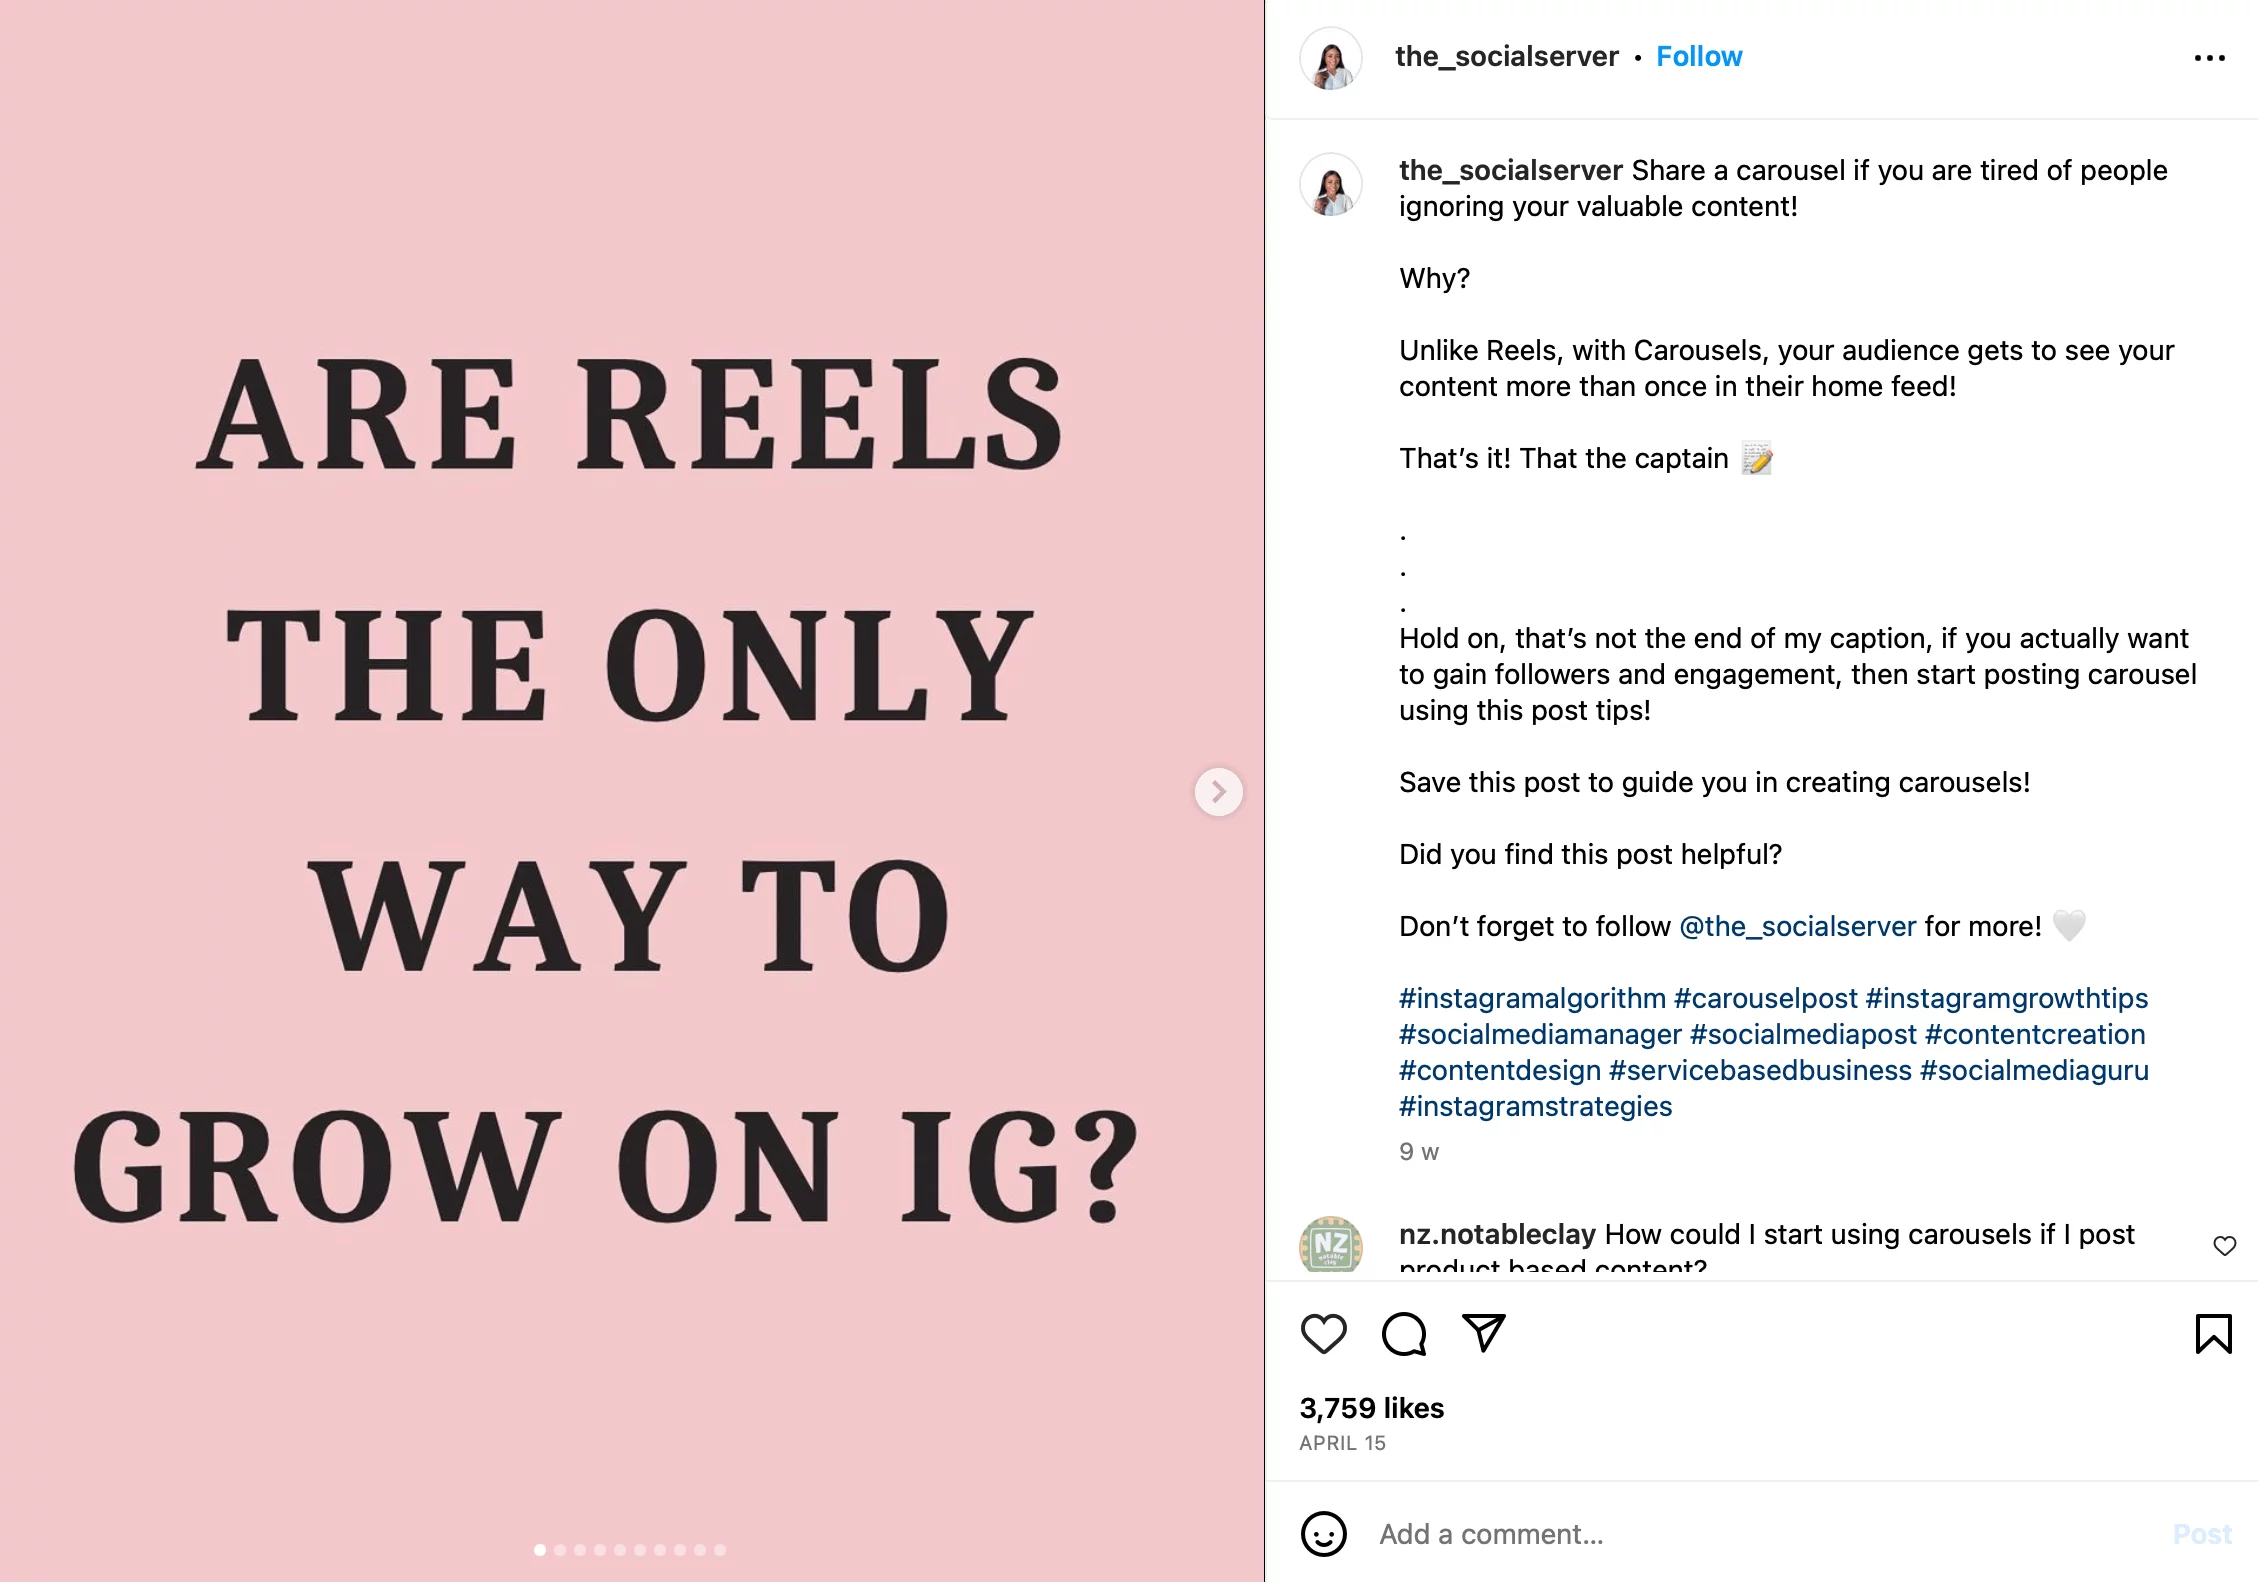 Instagram carousel post from @the_socialserver showing the "Are reels the only way to grow on IG?" question on a pink background